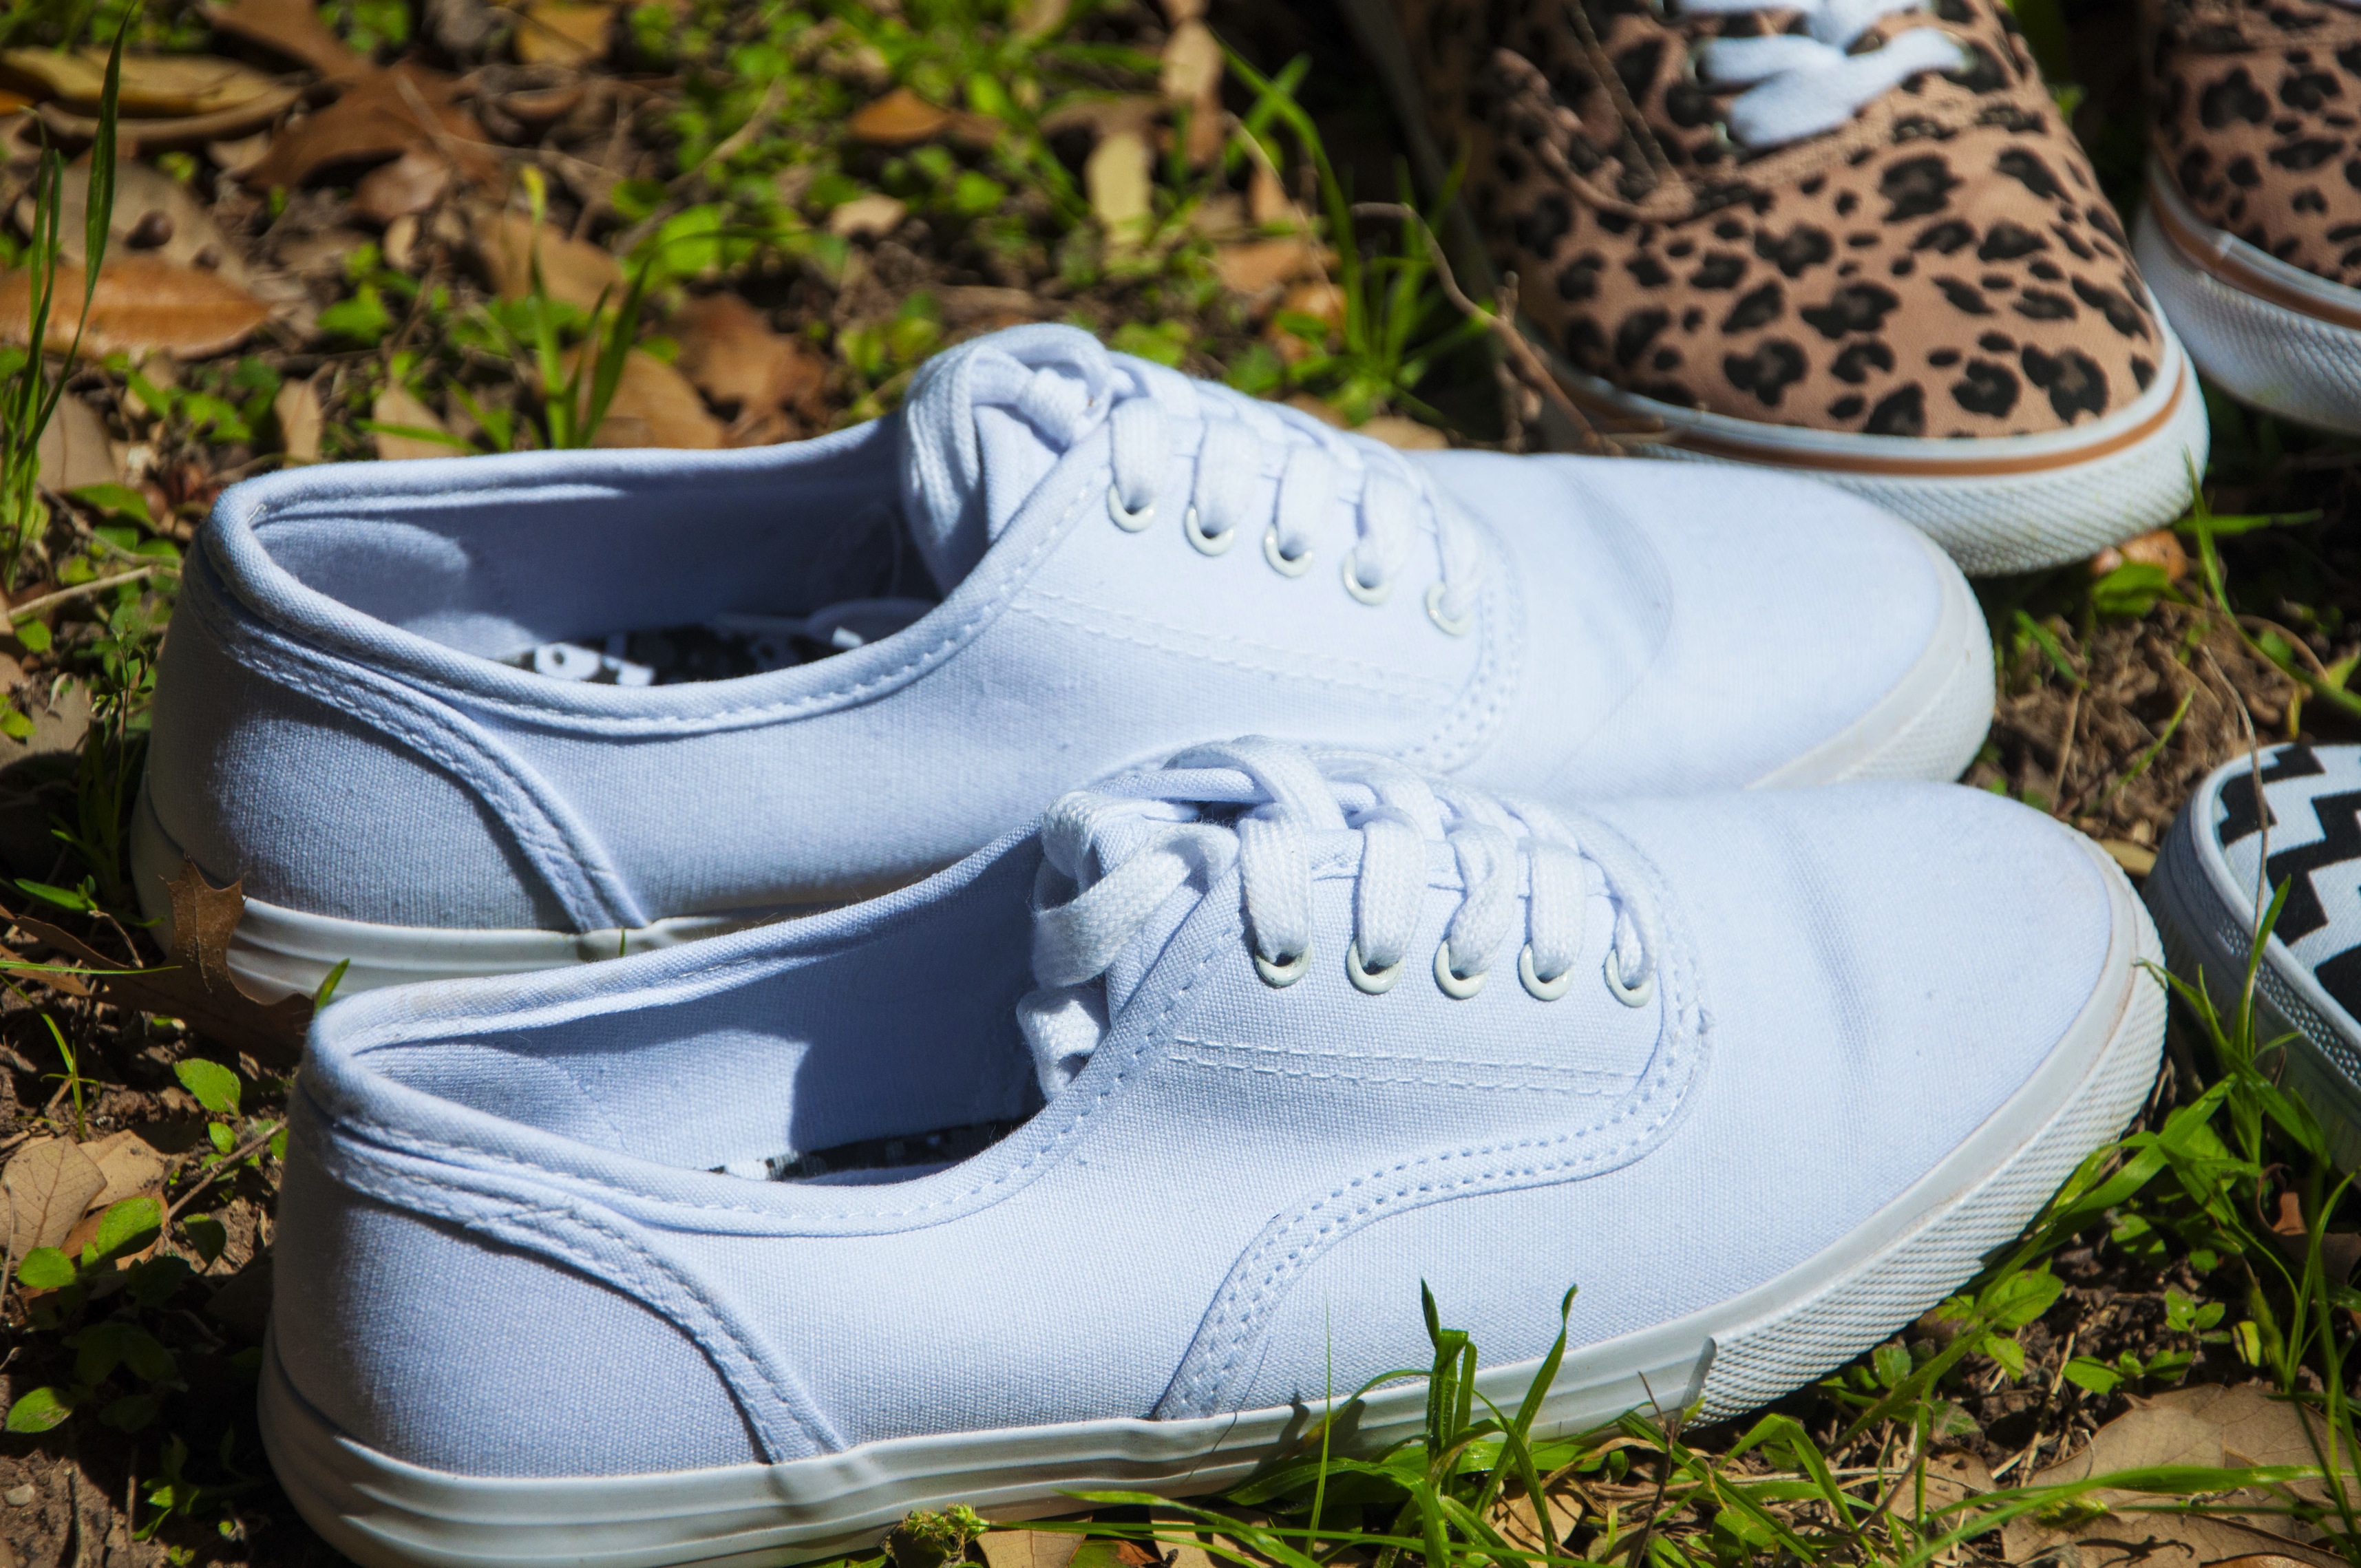 What do you wear your Keds with?